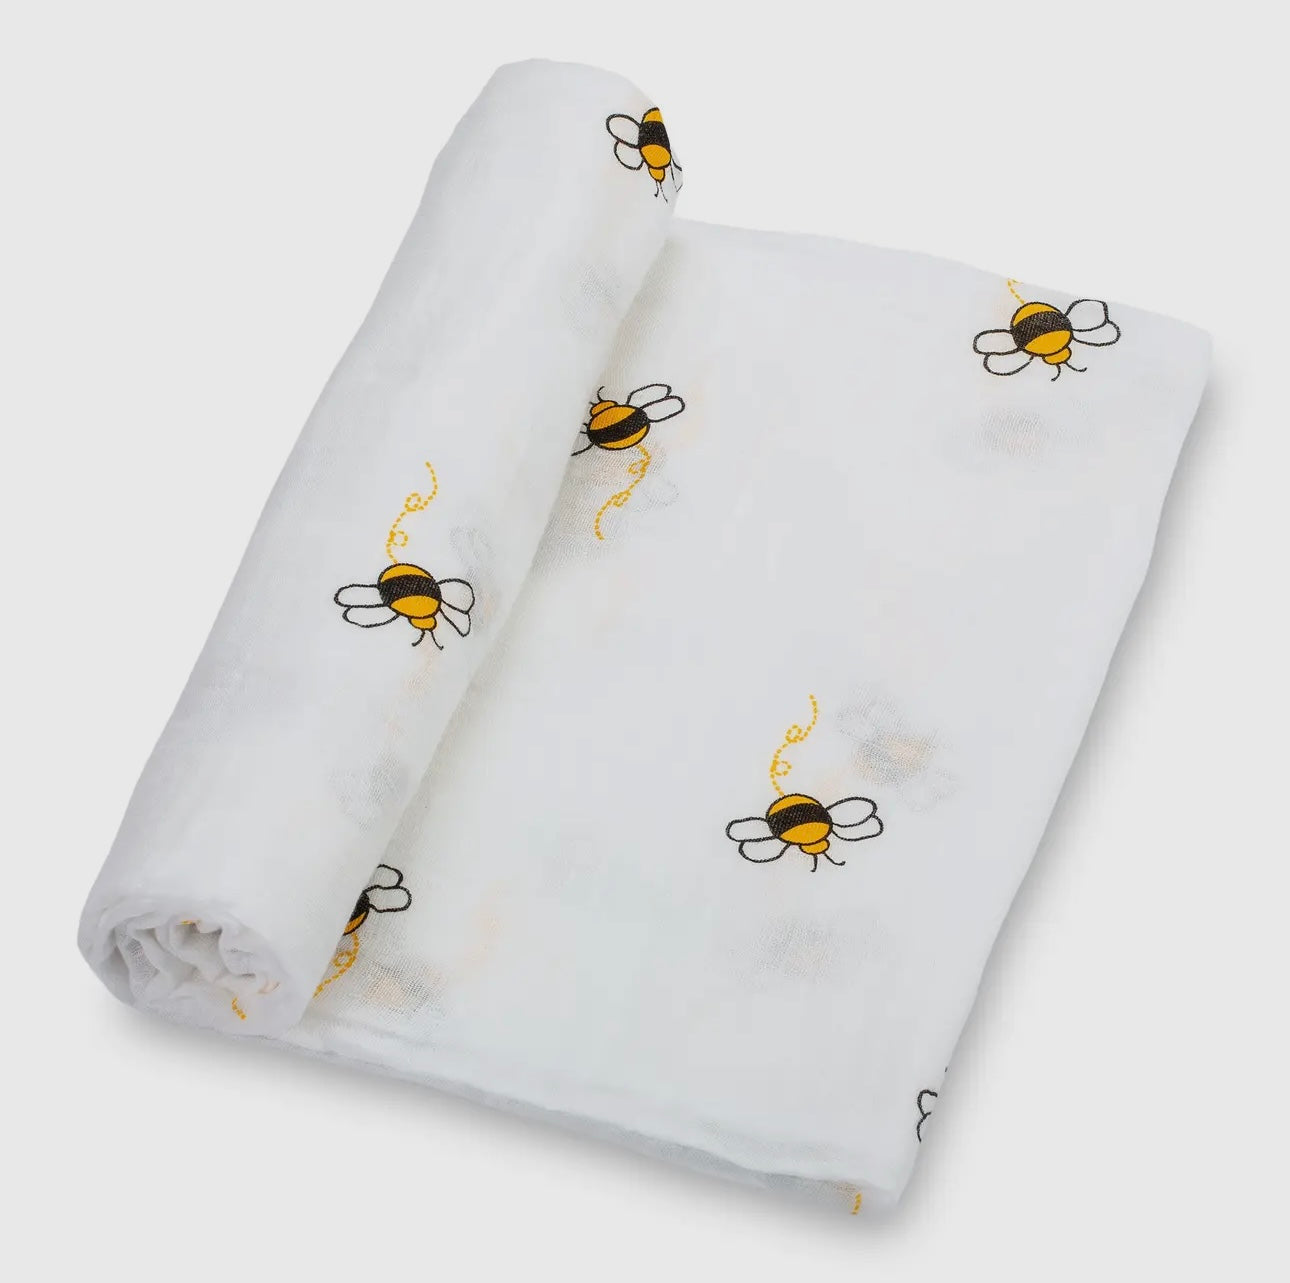 Busy Bee Swaddle Blanket